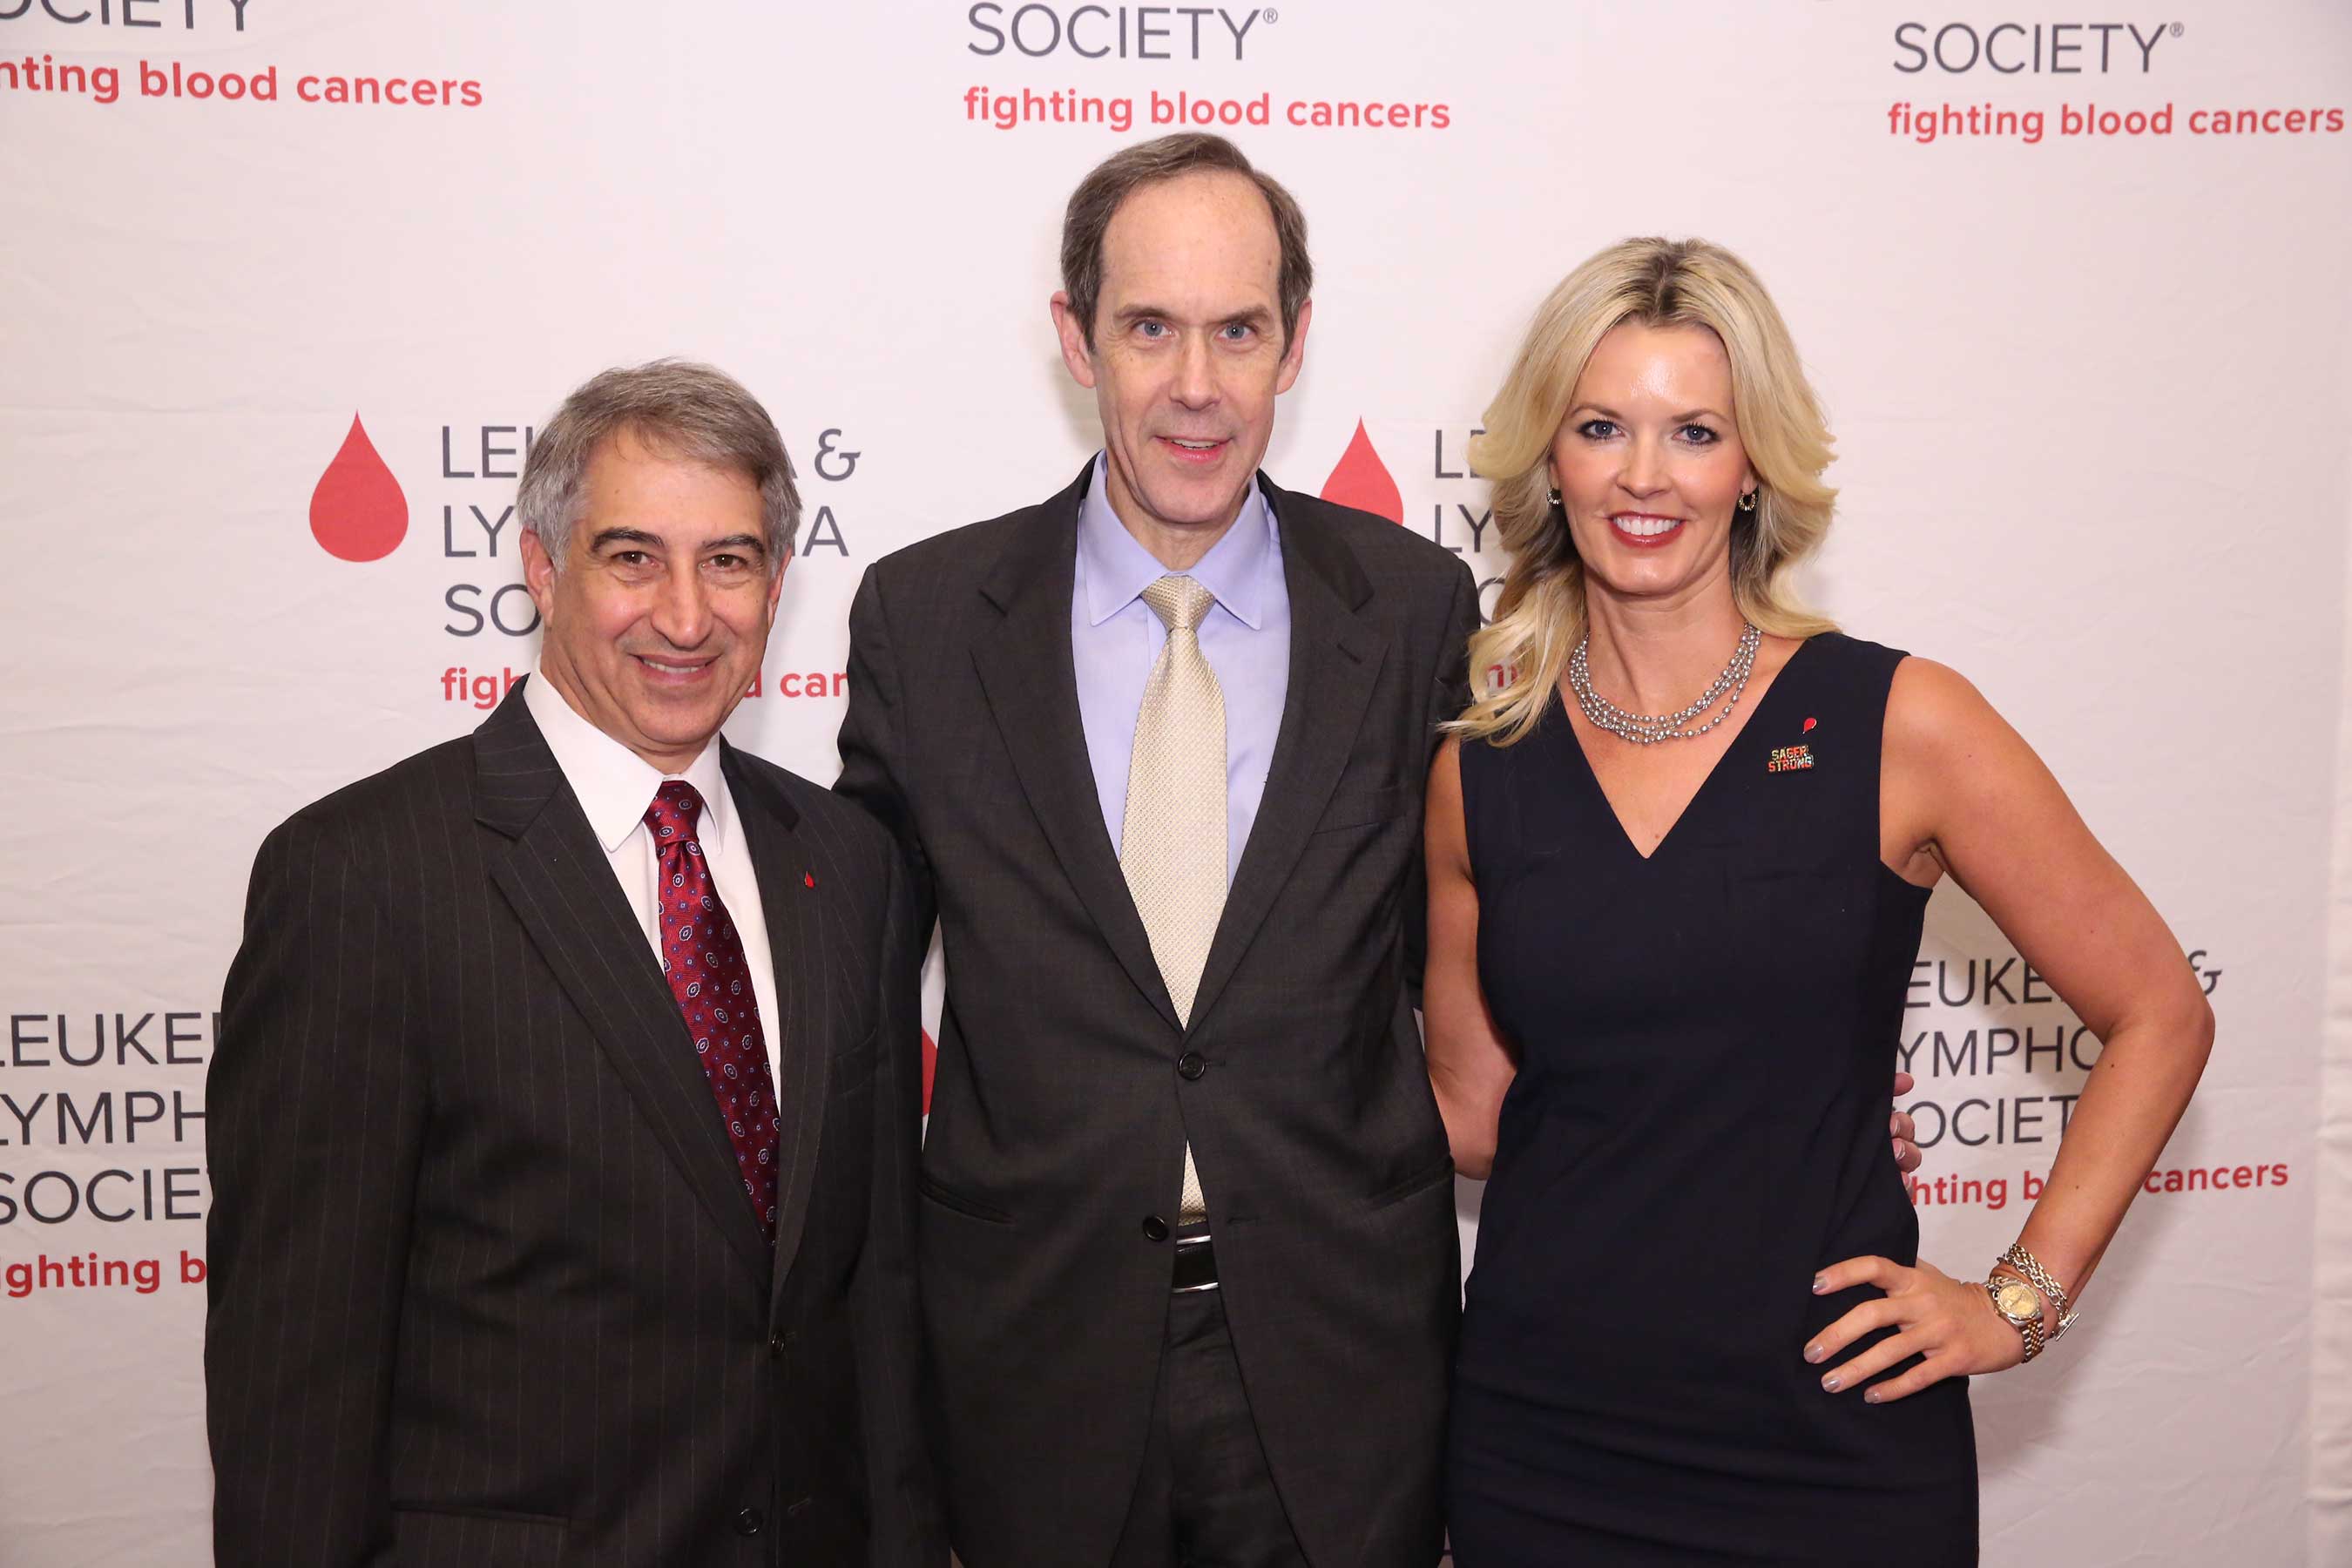 Dr. Louis DeGennaro, President & CEO, The Leukemia & Lymphoma Society; Dr. Brian Druker, Oregon Health & Science University, and Stacy Sager, president of SAGERSTRONG Foundation and widow of Craig Sager.